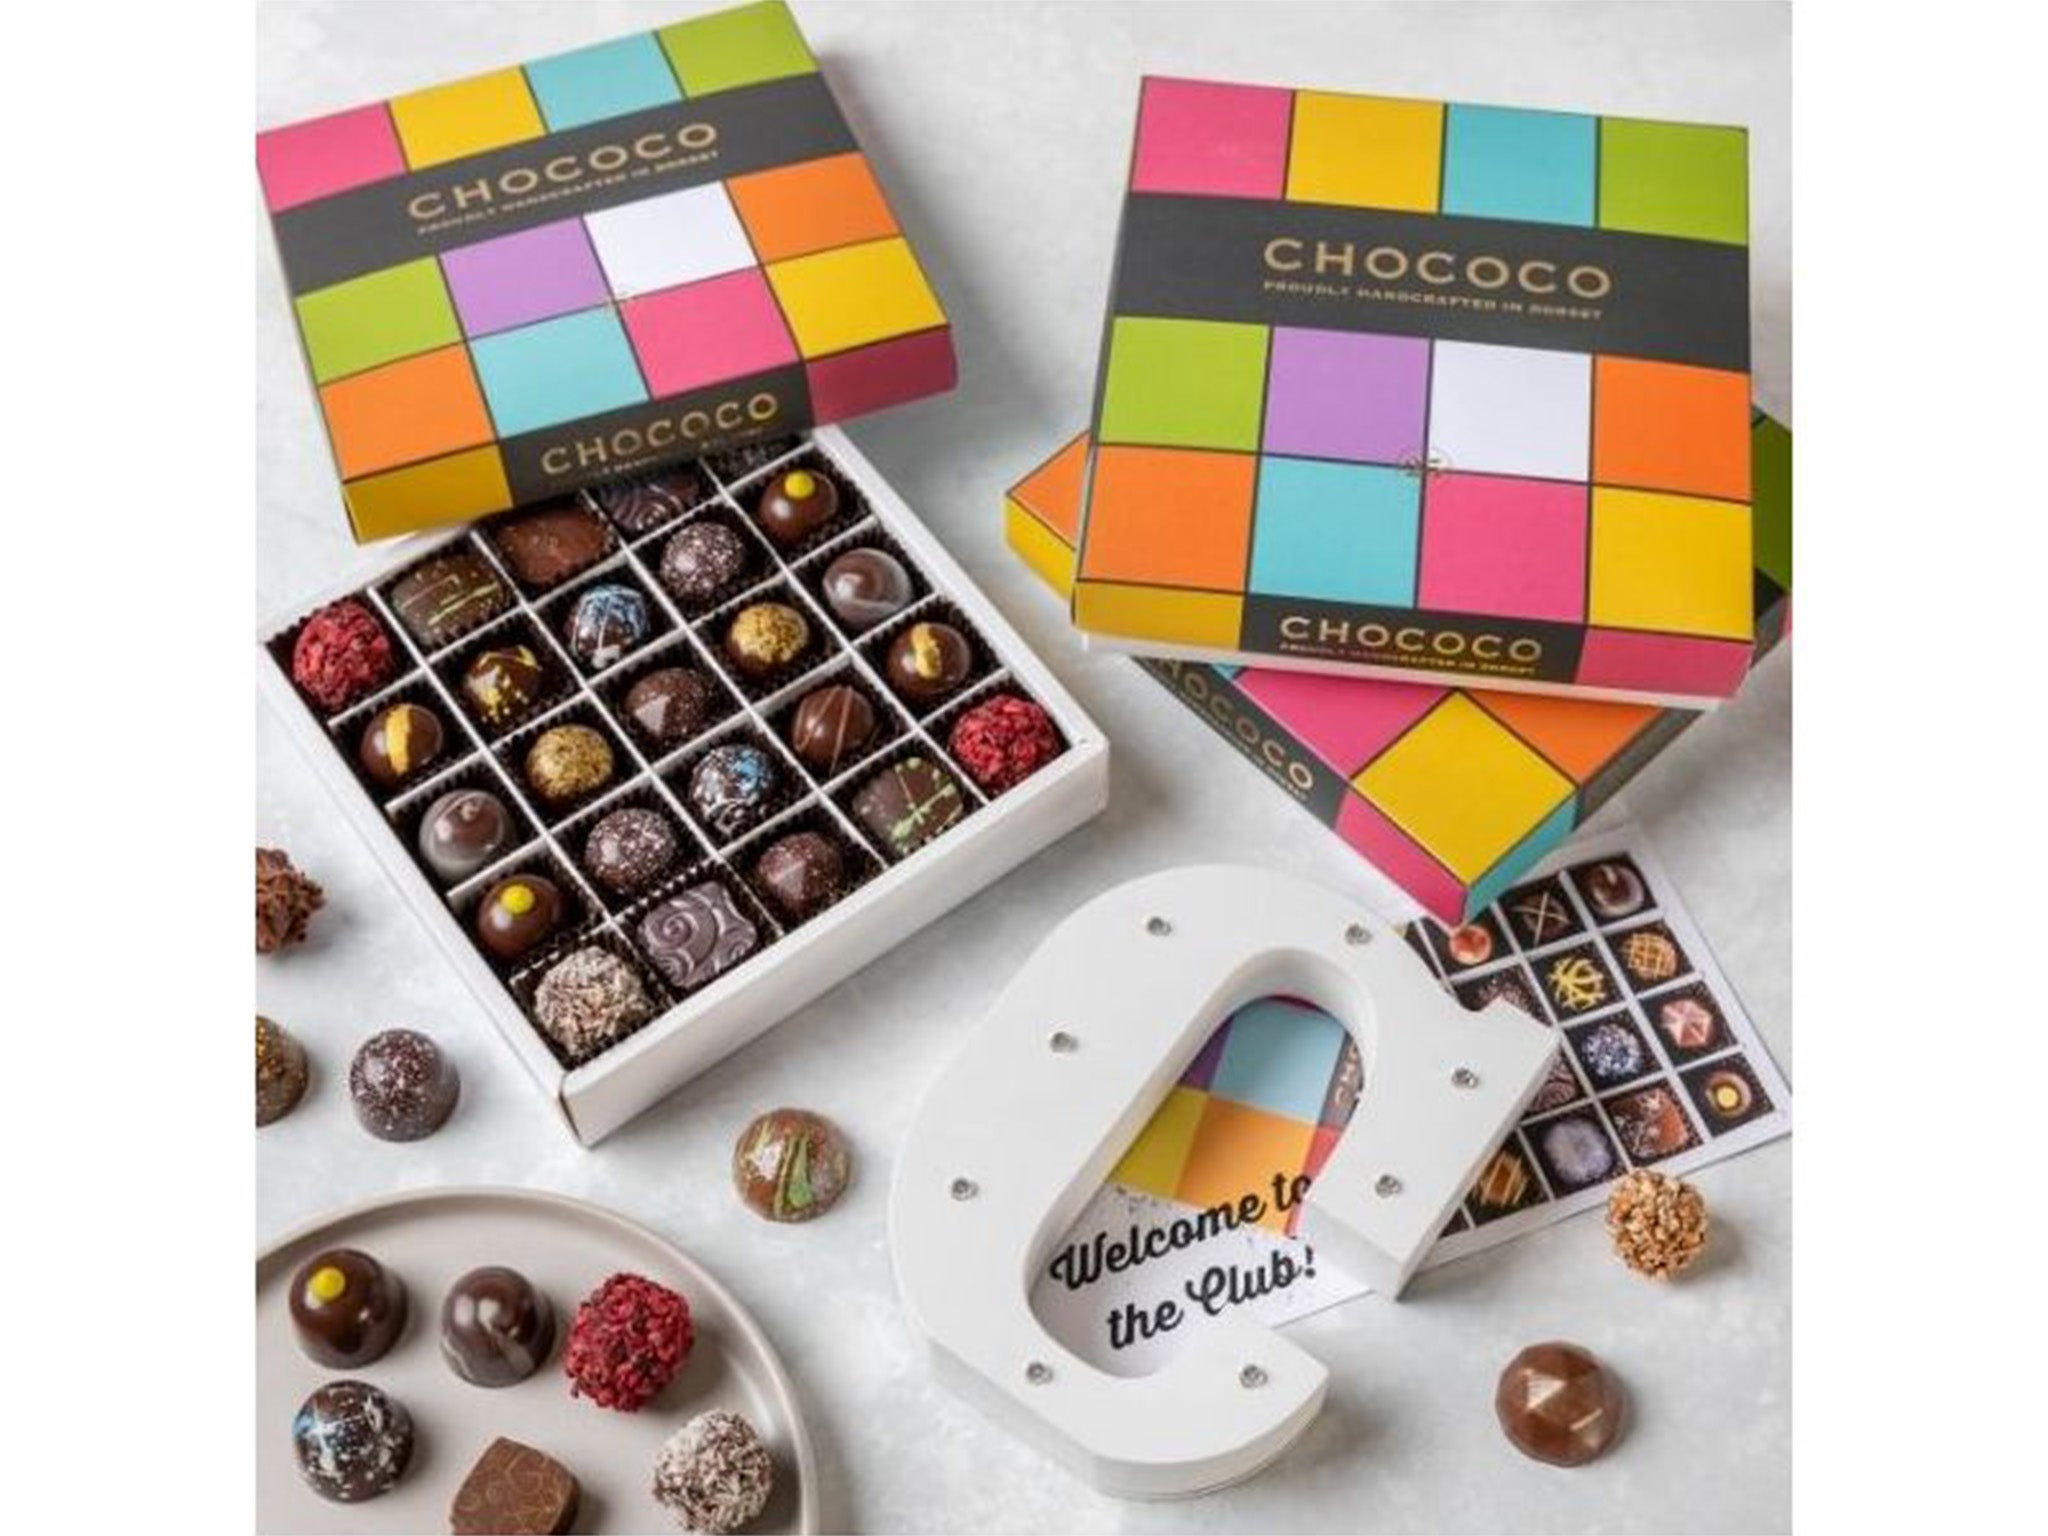 Chococo fresh large monthly box subscription